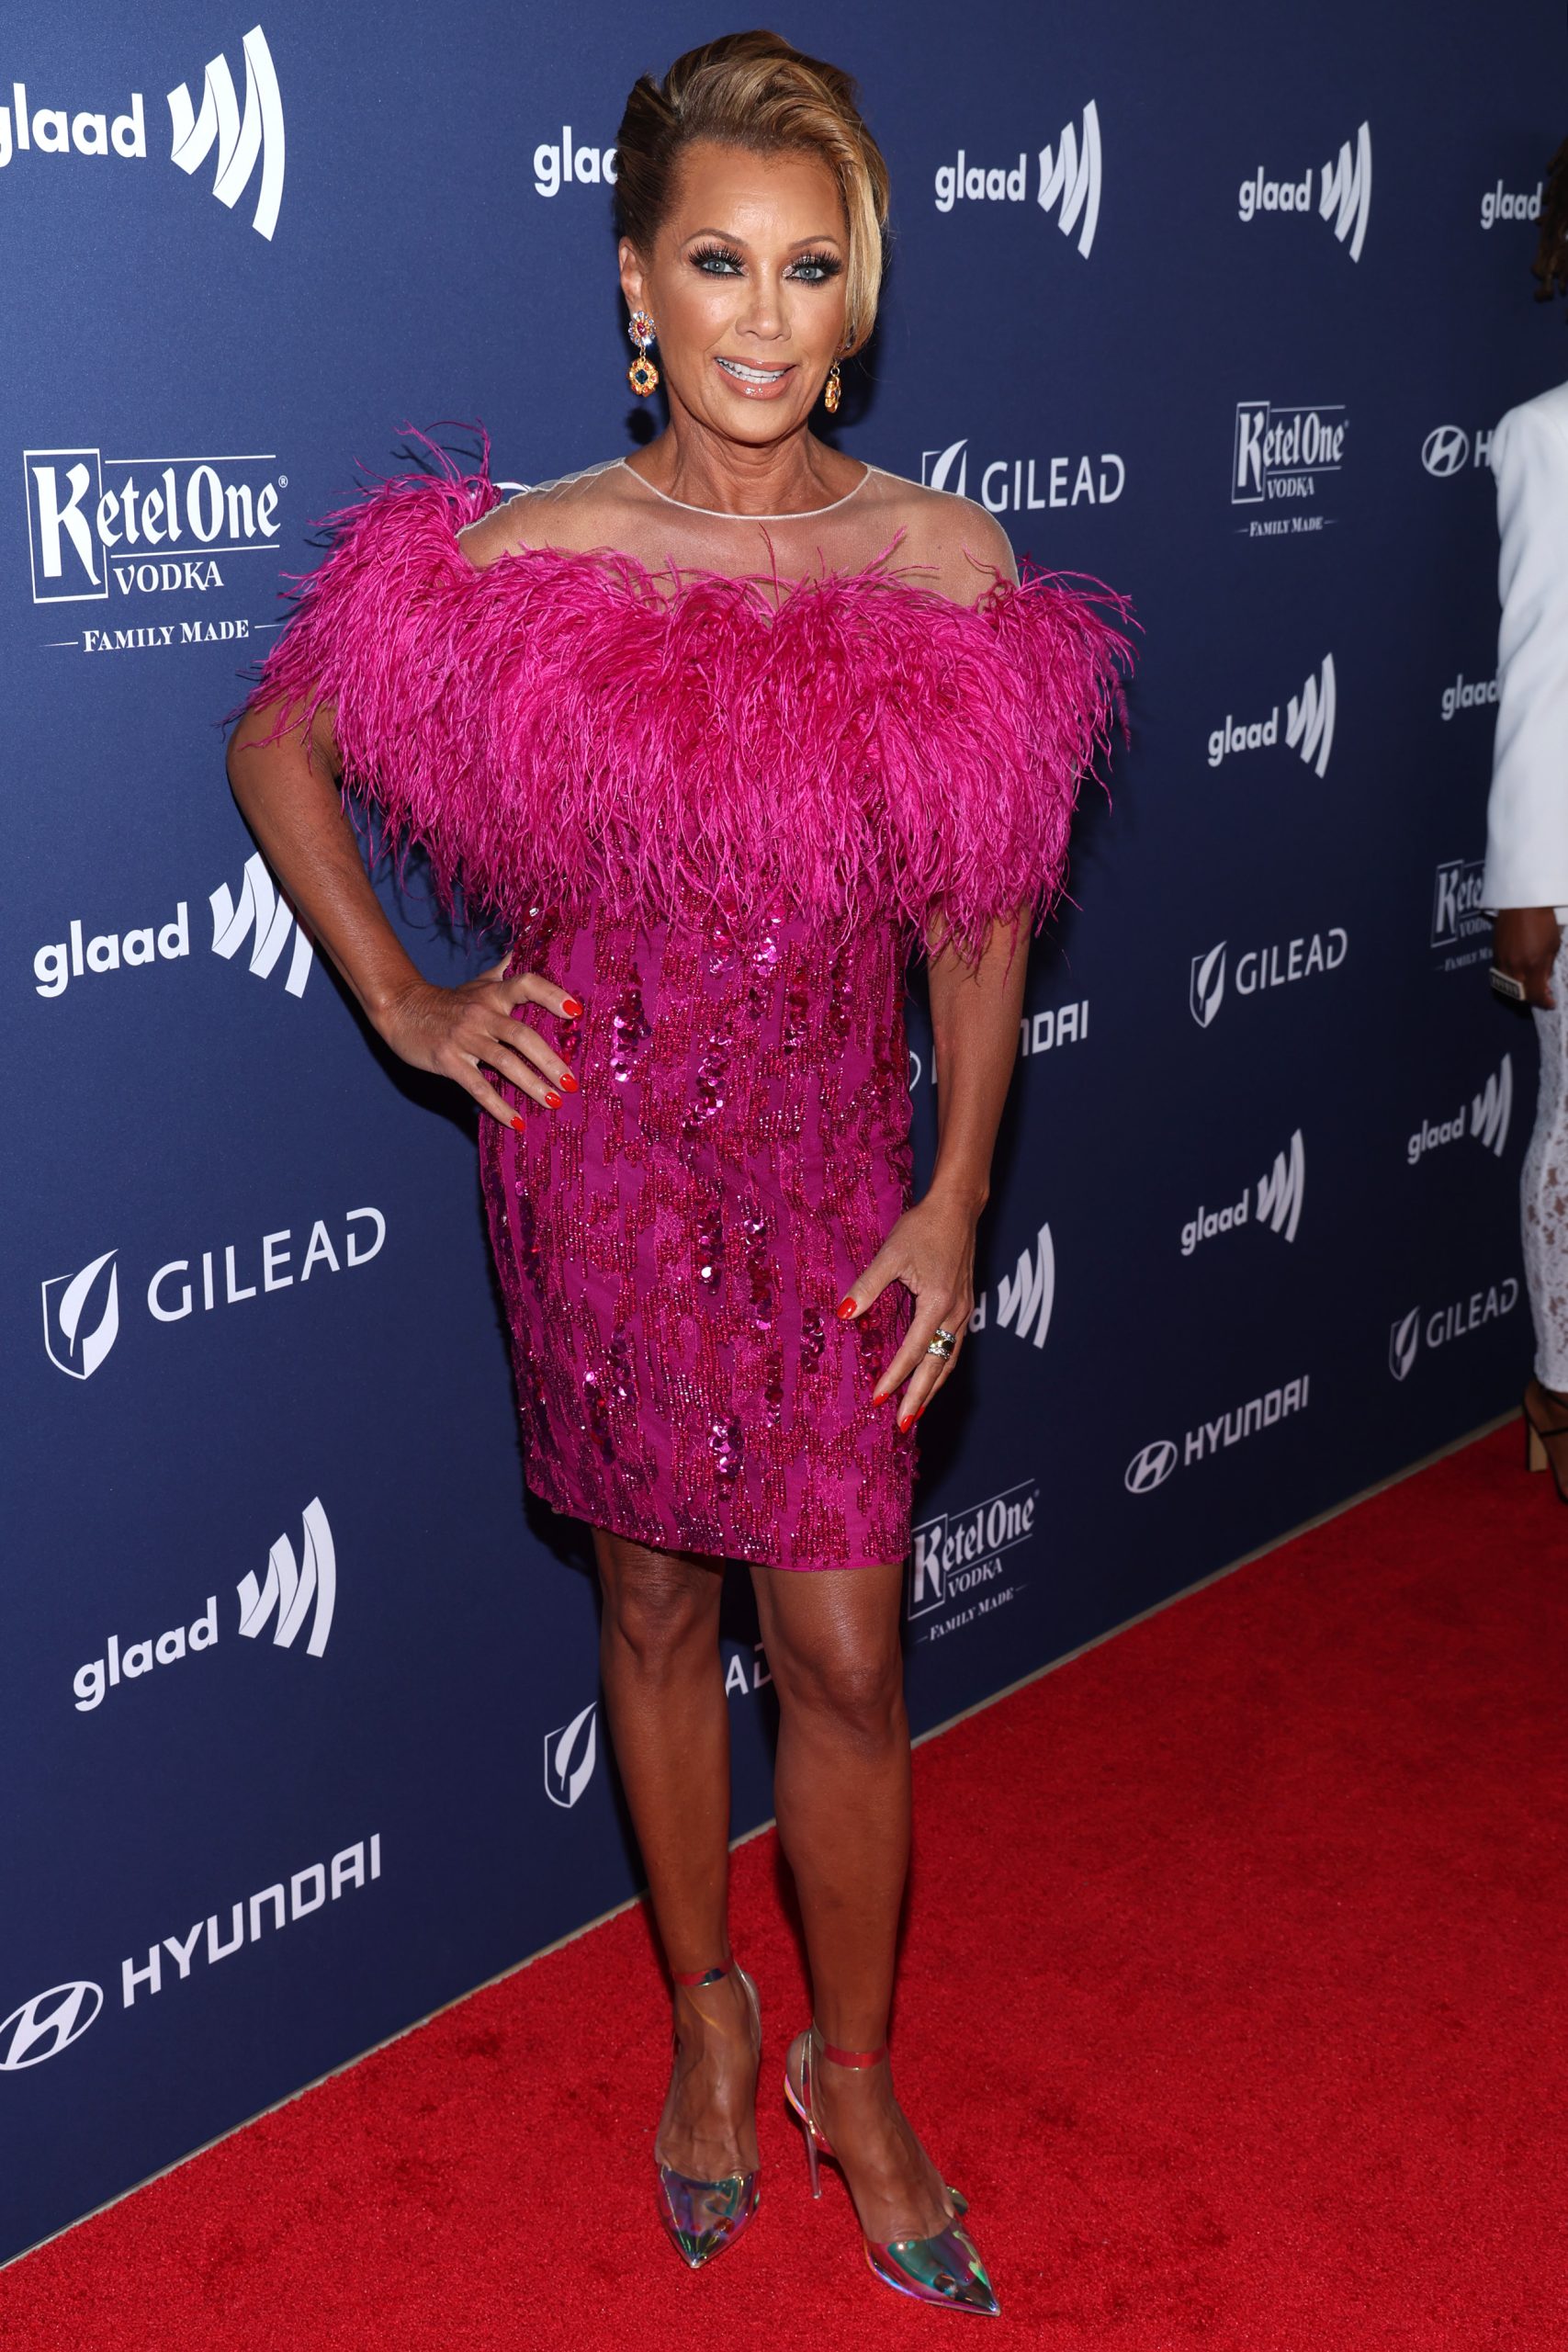 BEVERLY HILLS, CALIFORNIA - MARCH 30: Vanessa Williams attends the 34th Annual GLAAD Media Awards Sponsored by Ketel One Family Made Vodka at The Beverly Hilton on March 30, 2023 in Beverly Hills, California. (Photo by Phillip Faraone/Getty Images for Ketel One)